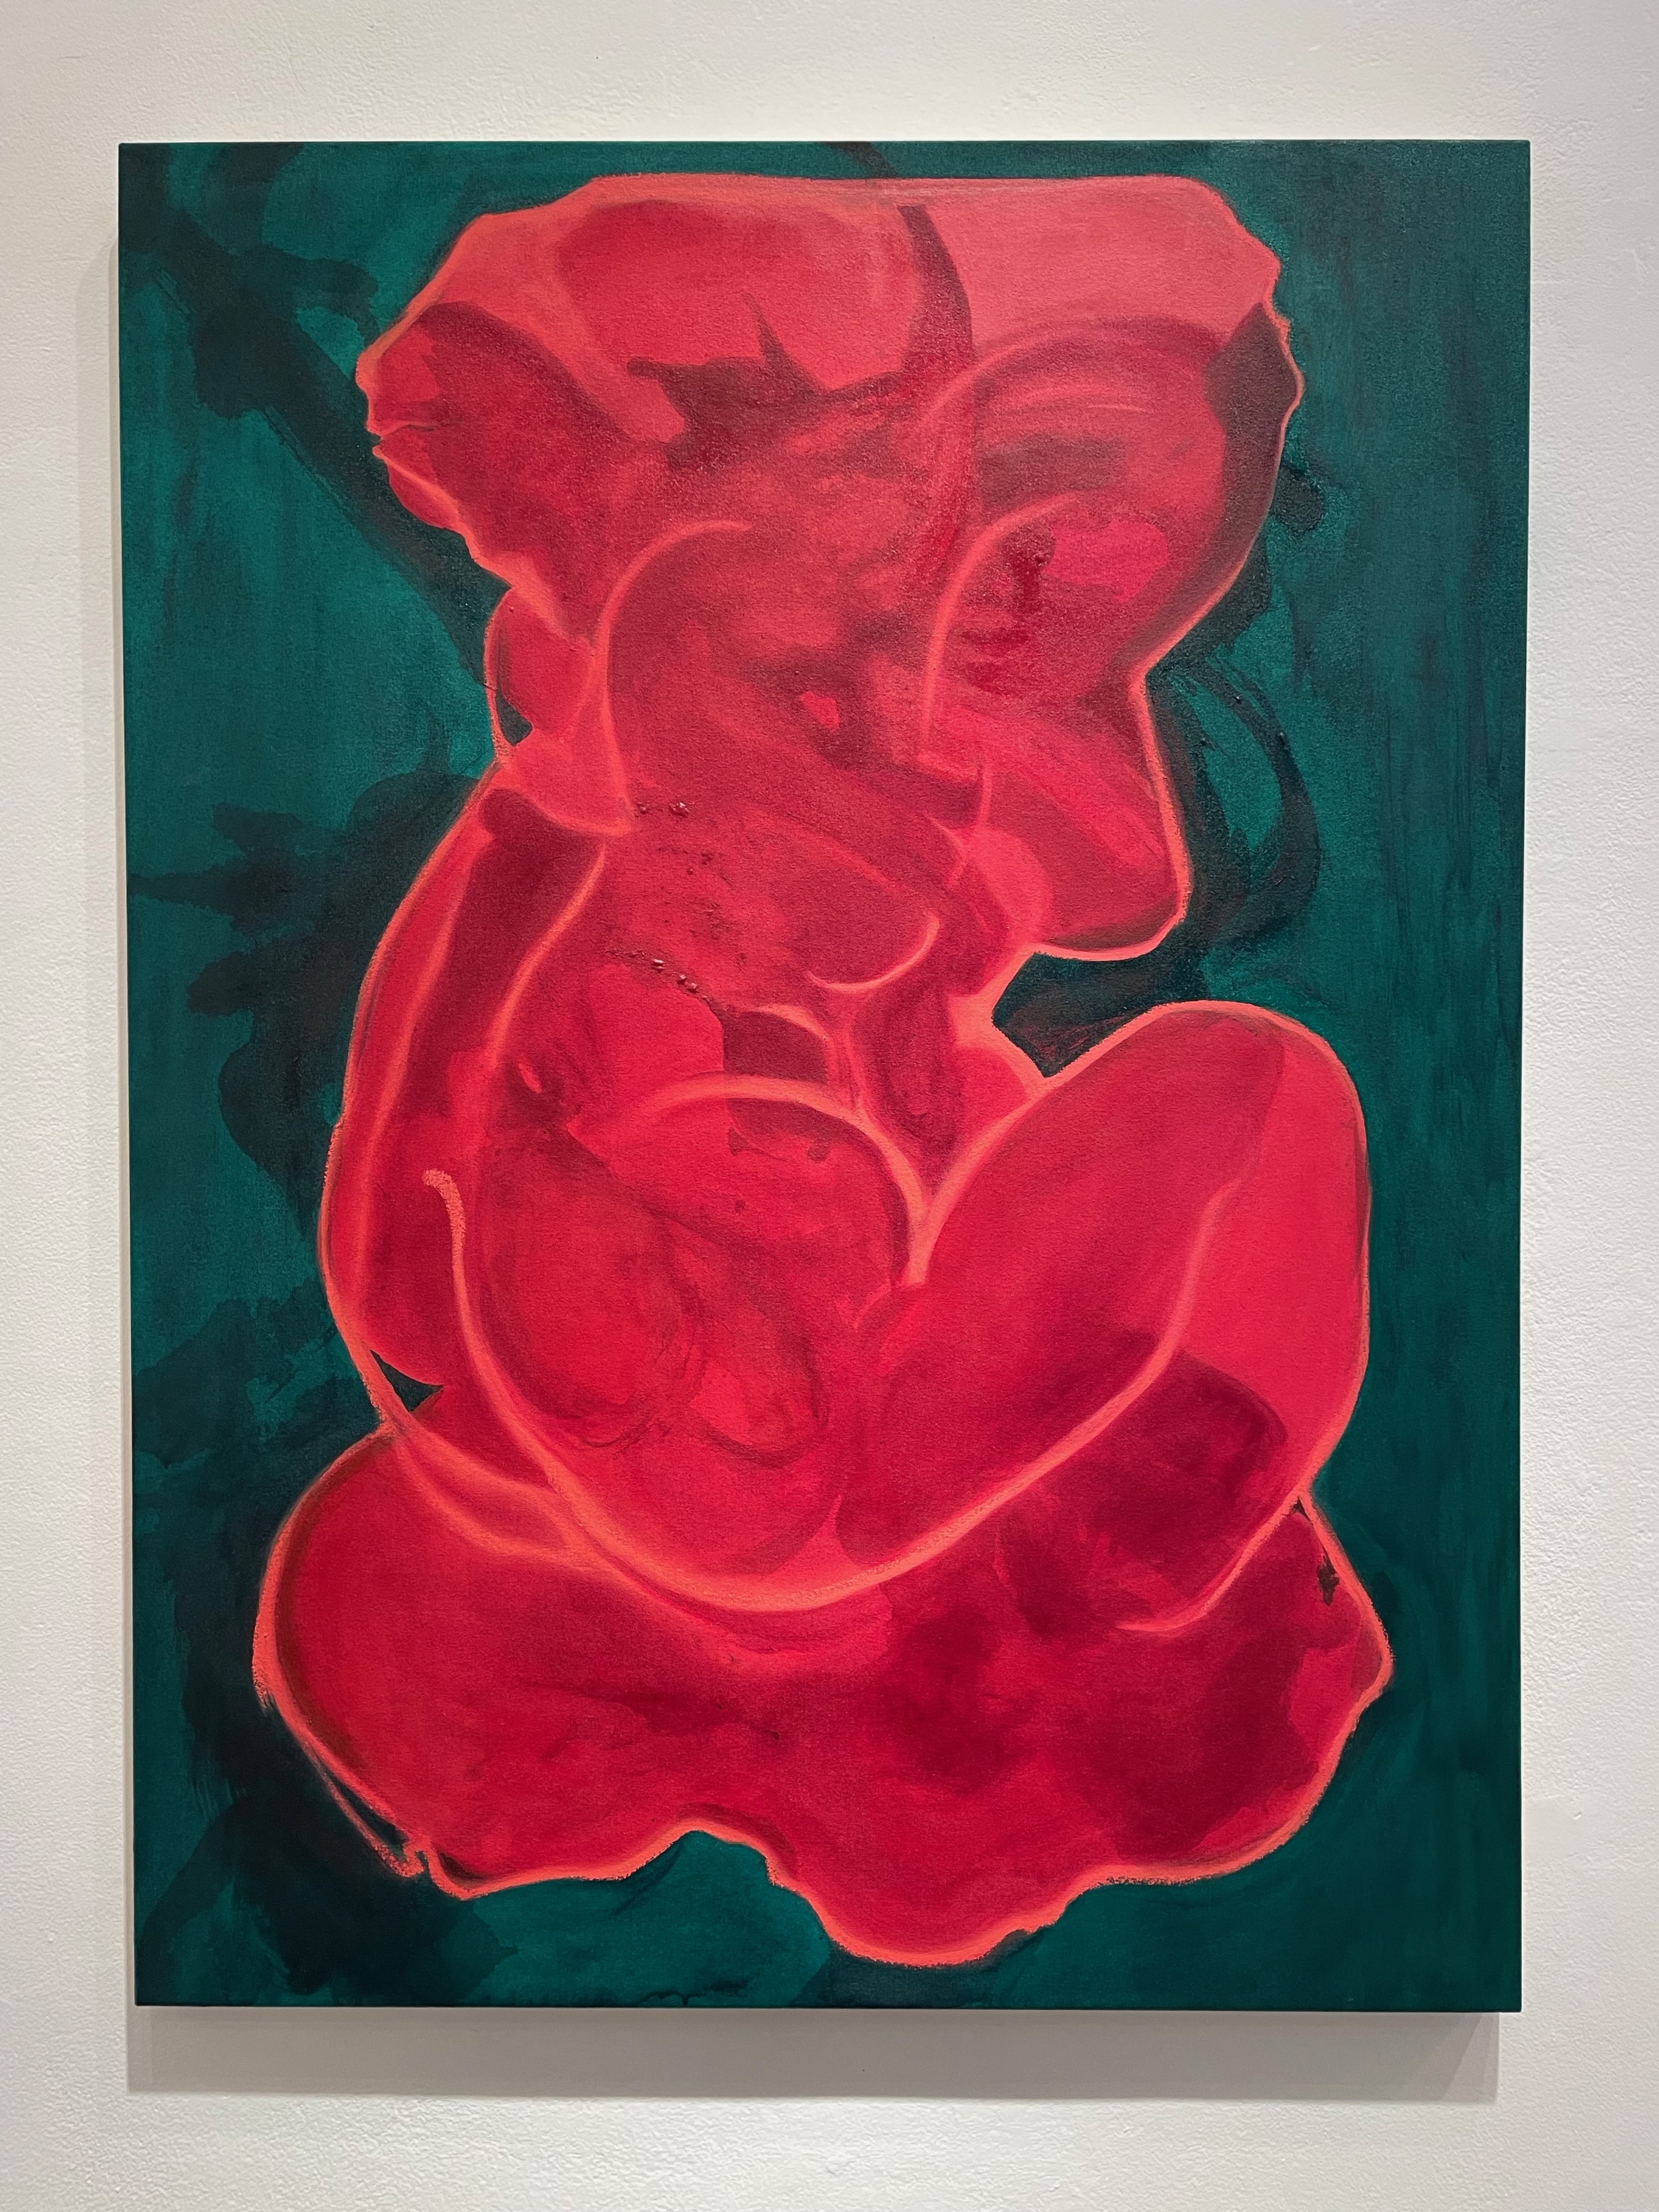 vertical rectange painting of an abstracted reddish figure on an emerald green background